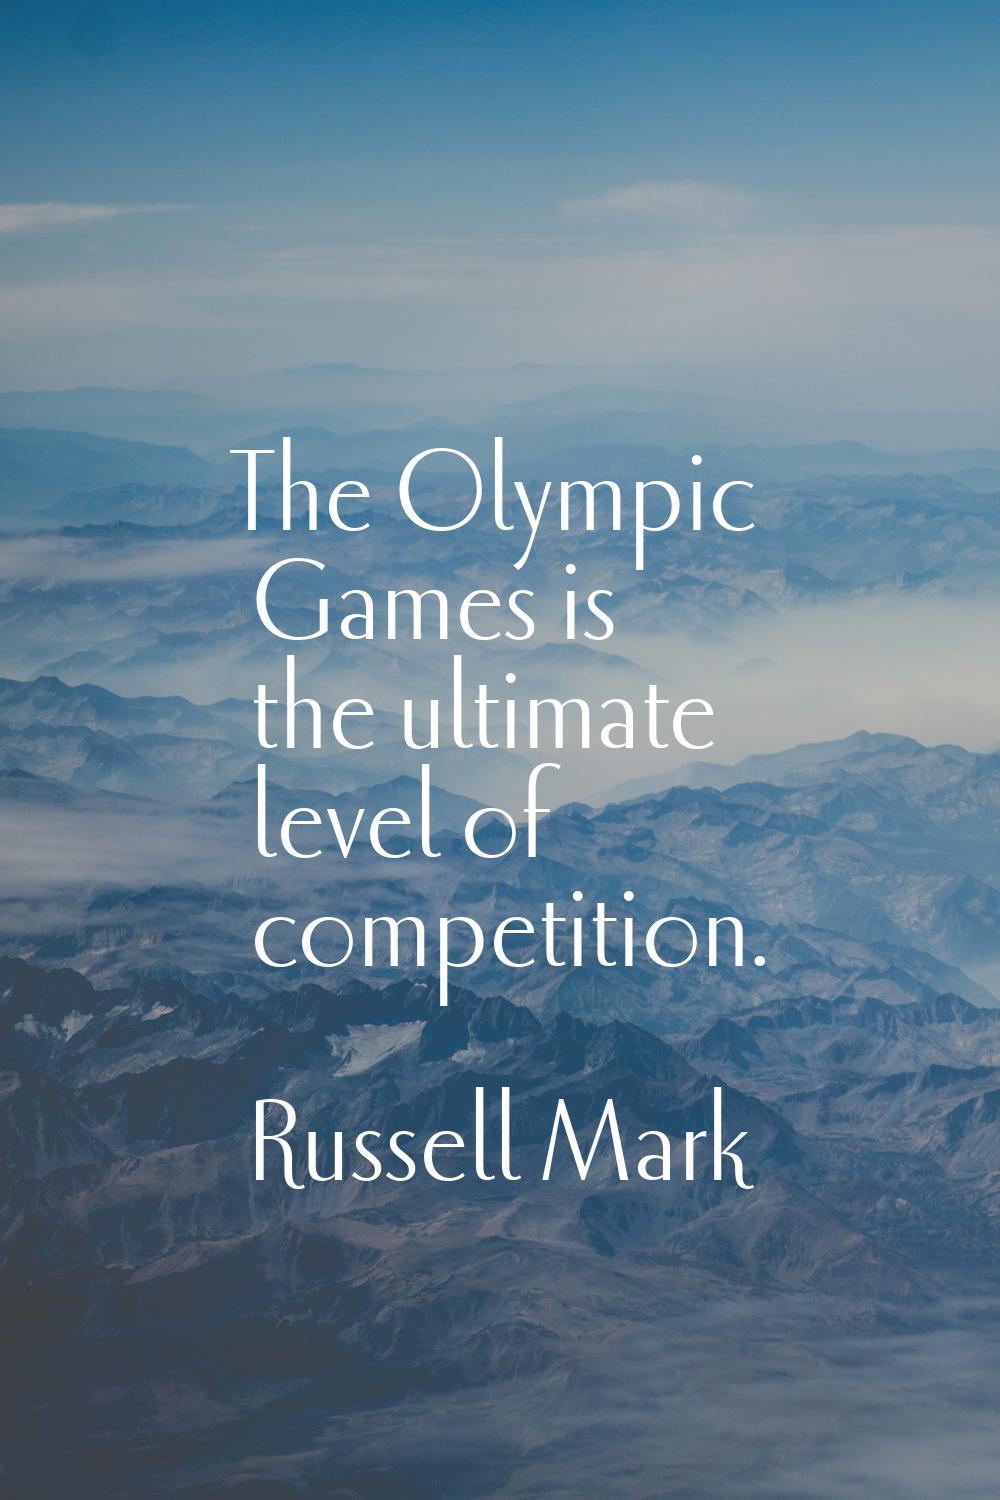 The Olympic Games is the ultimate level of competition.